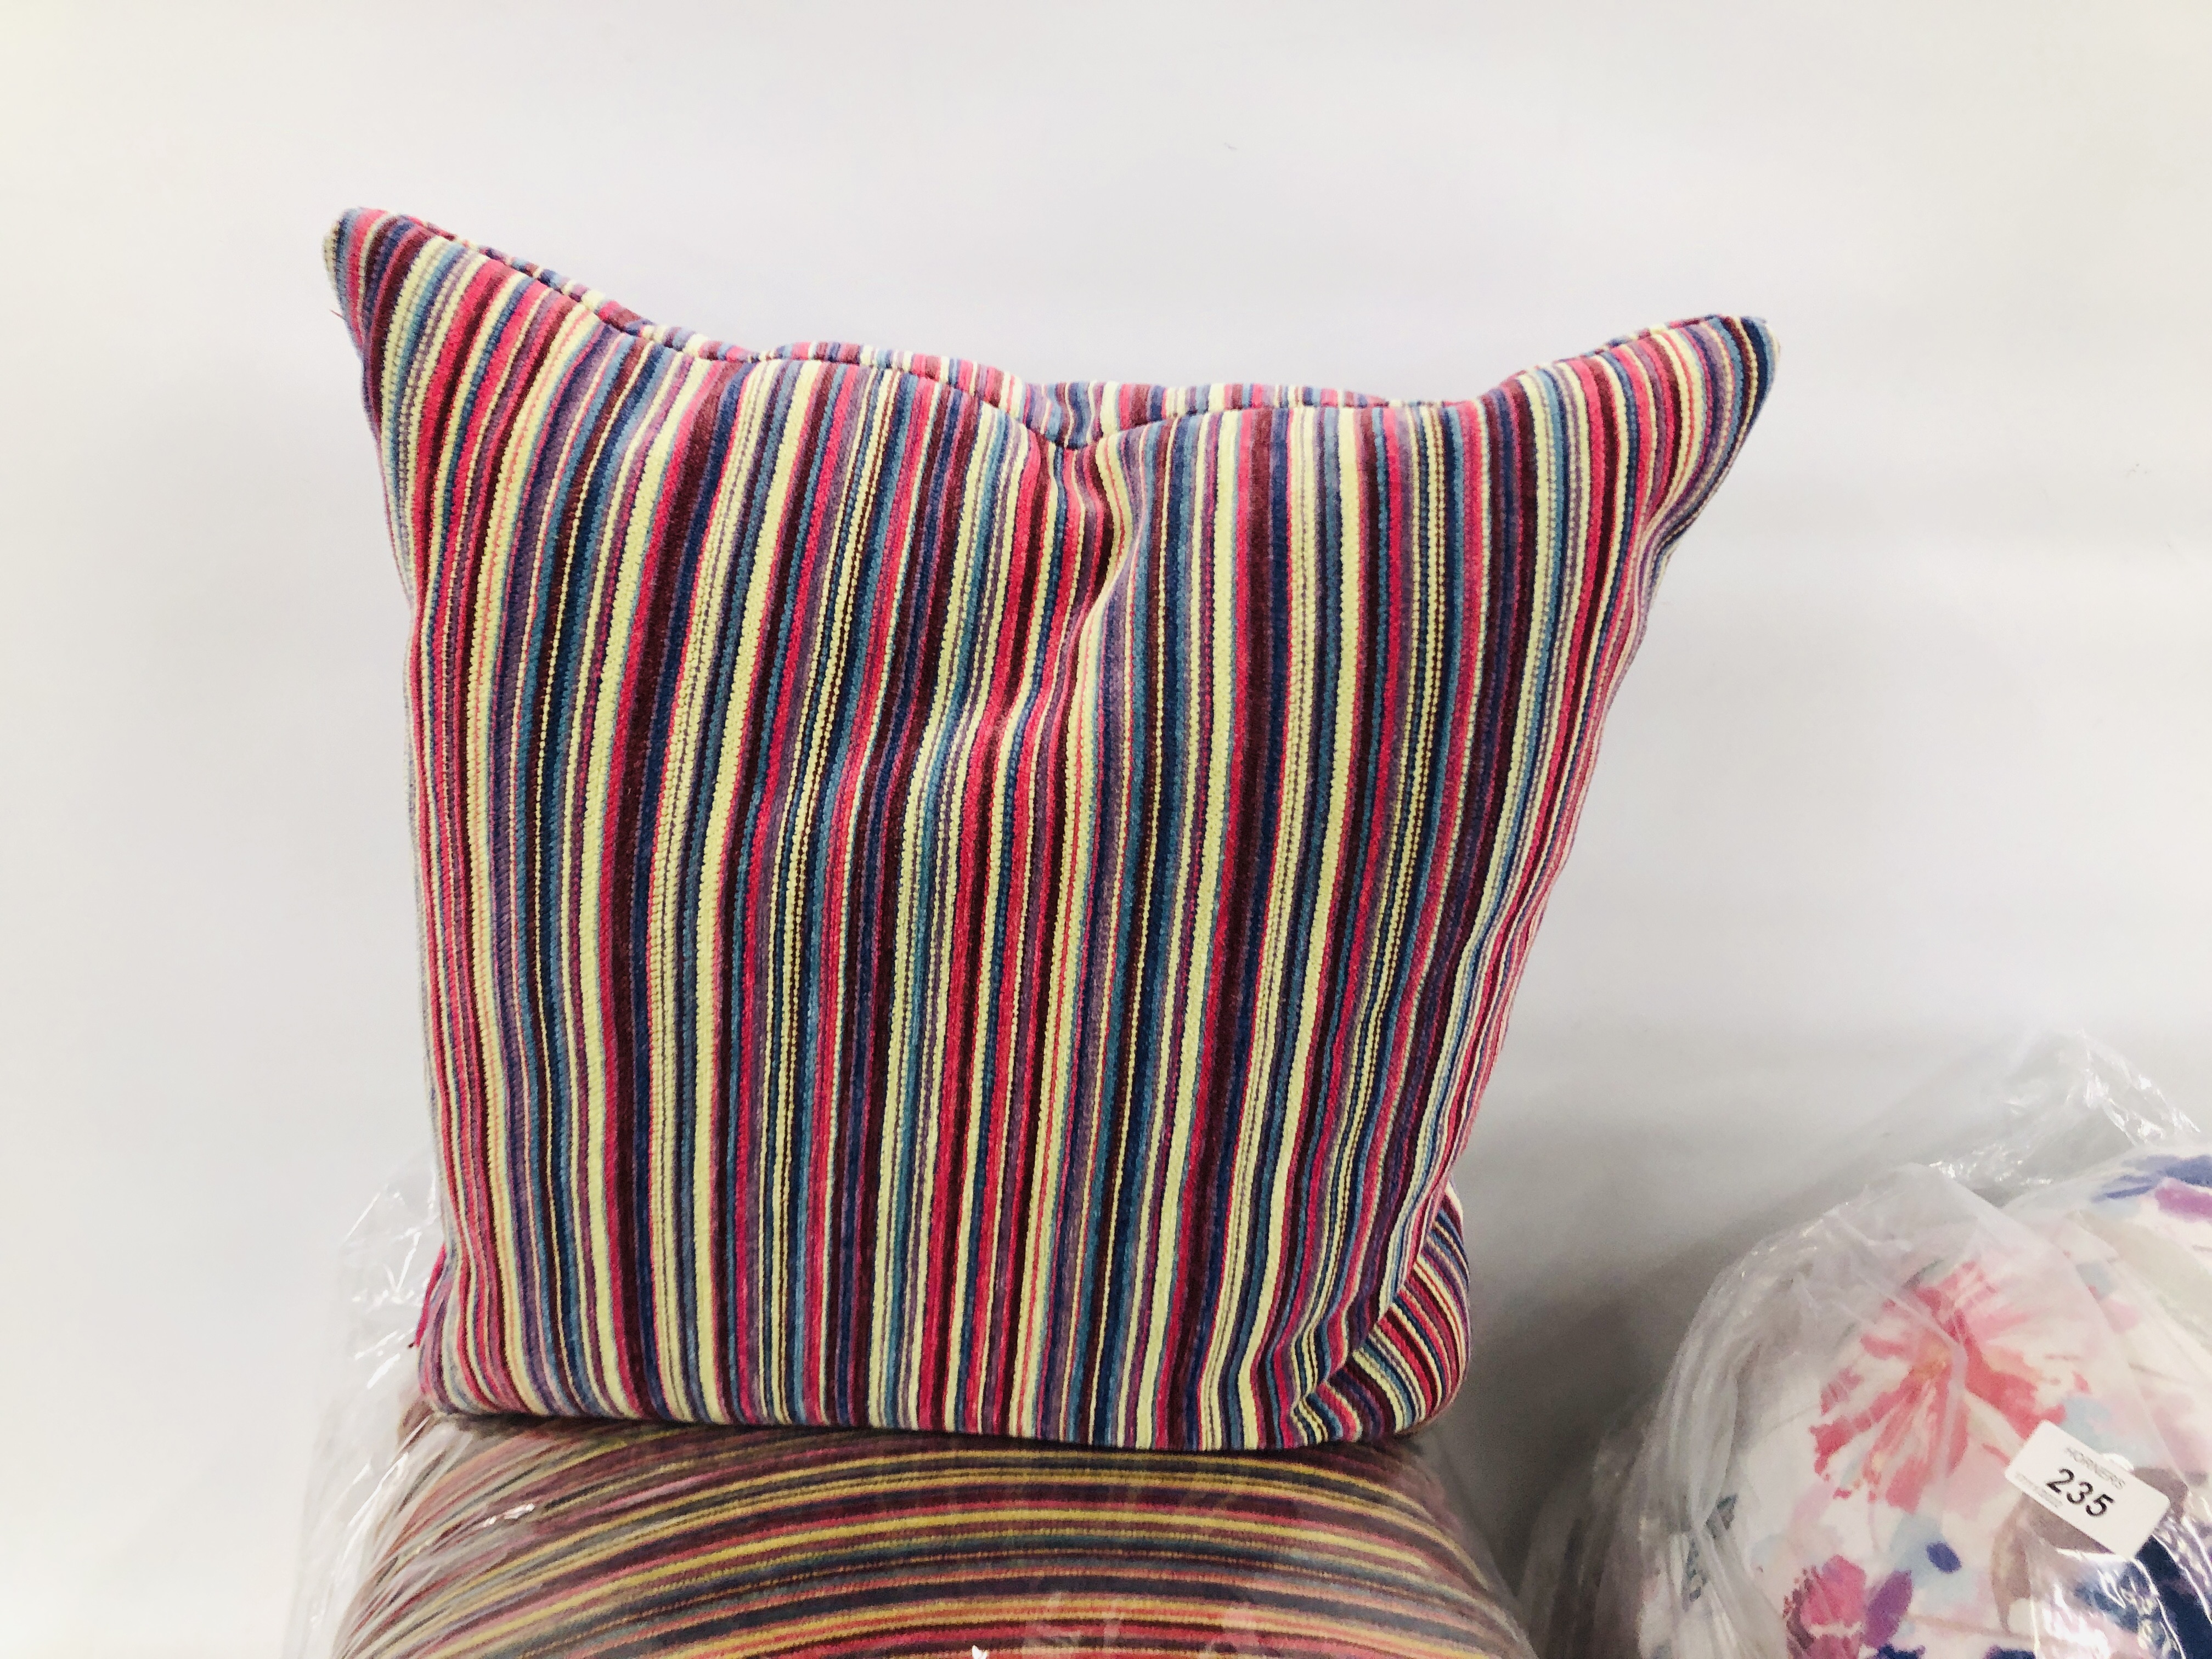 SIX MATCHING SATIN AND FABRIC BUTTERFLY / FLORAL DECORATED CUSHIONS AND THREE STRIPED CUSHIONS. - Image 2 of 3